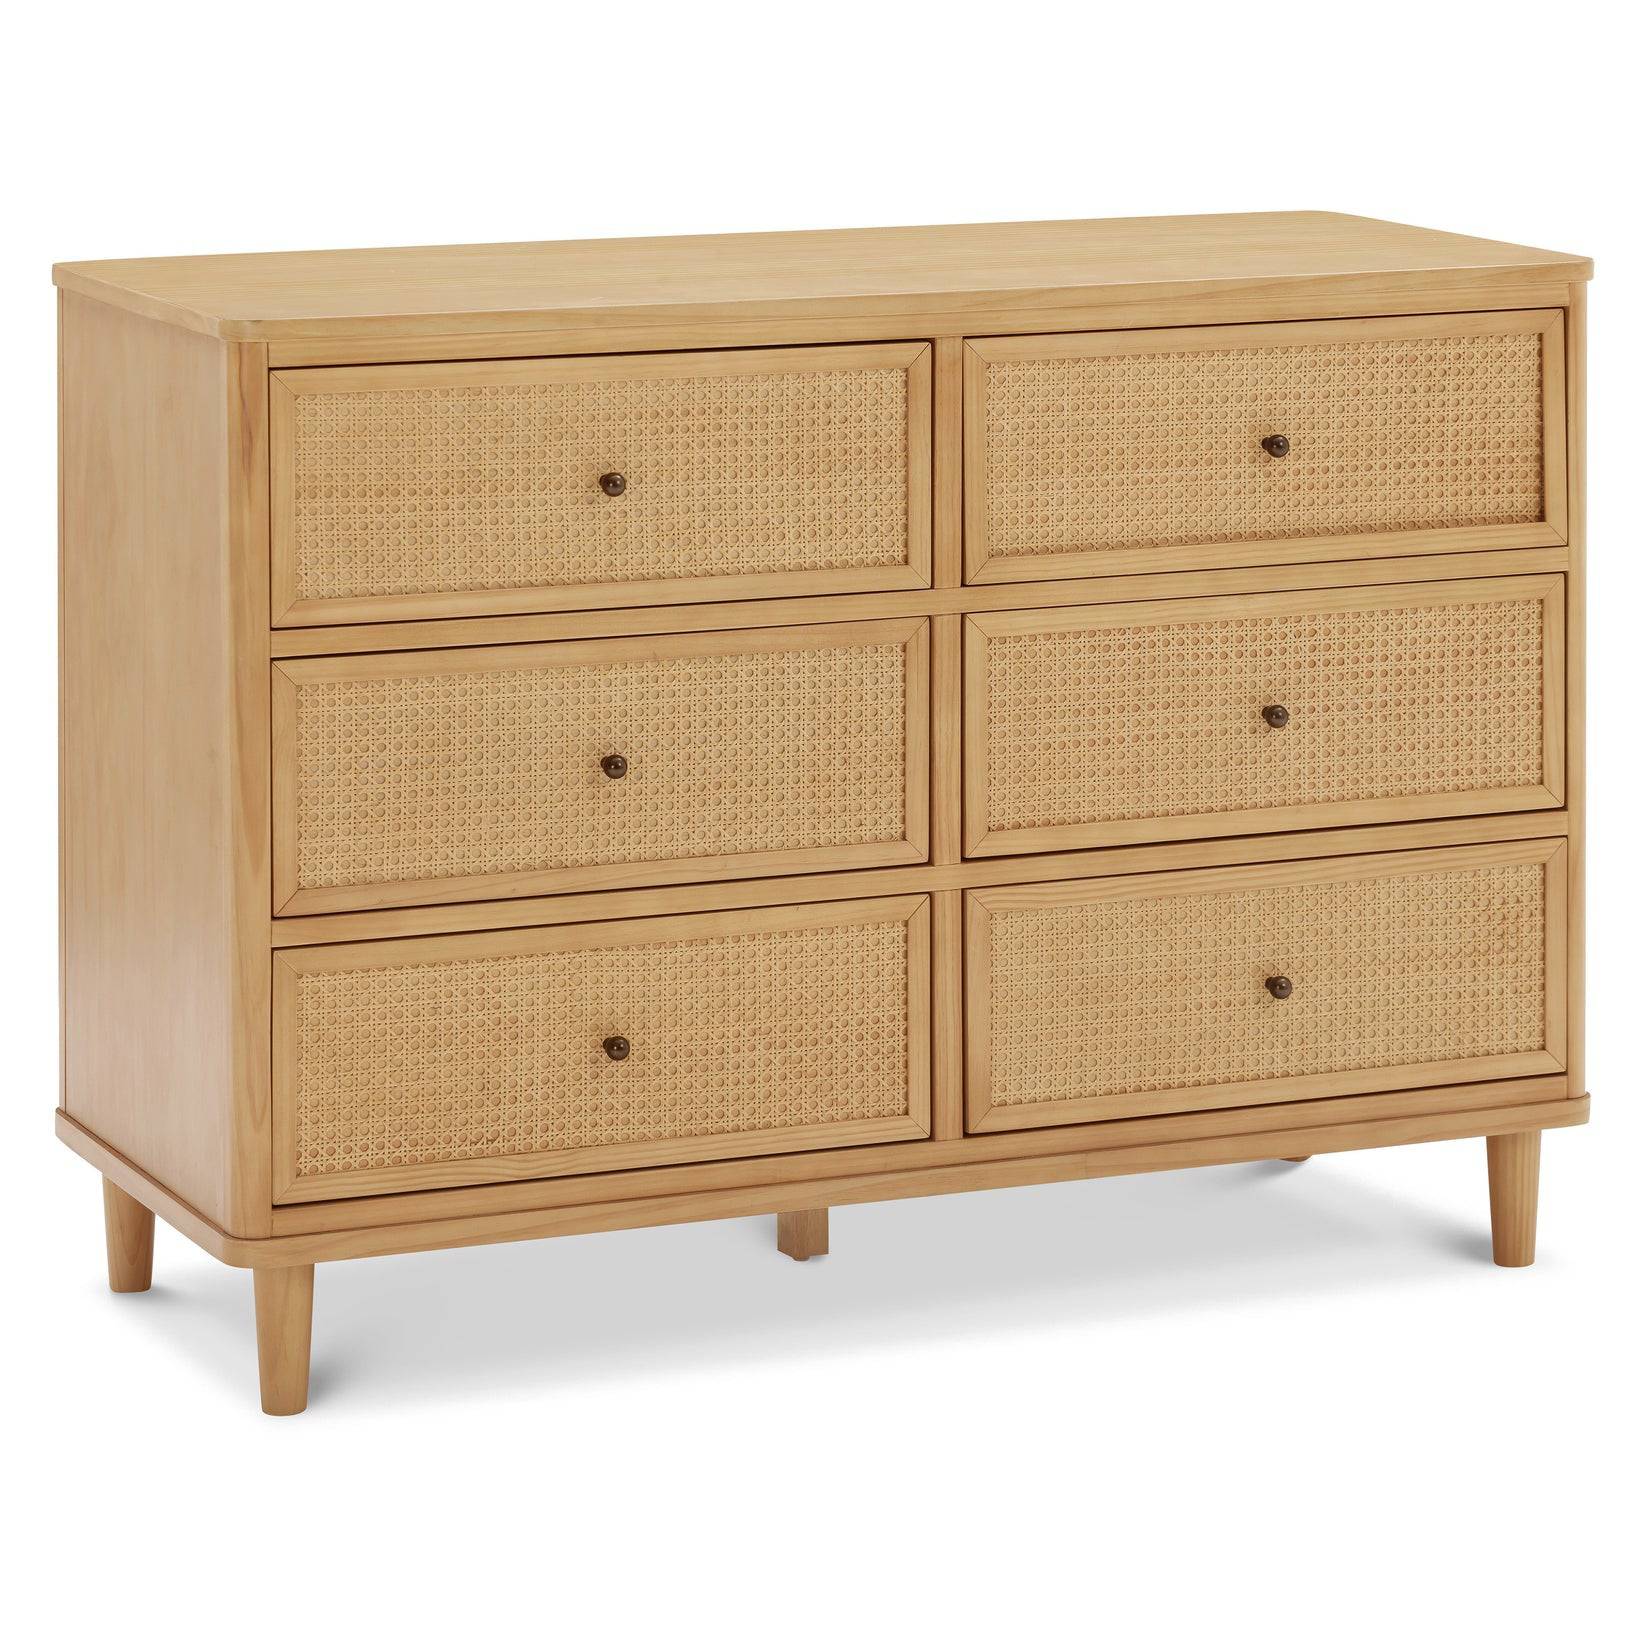 Marin with Cane 6 Drawer Dresser - Twinkle Twinkle Little One